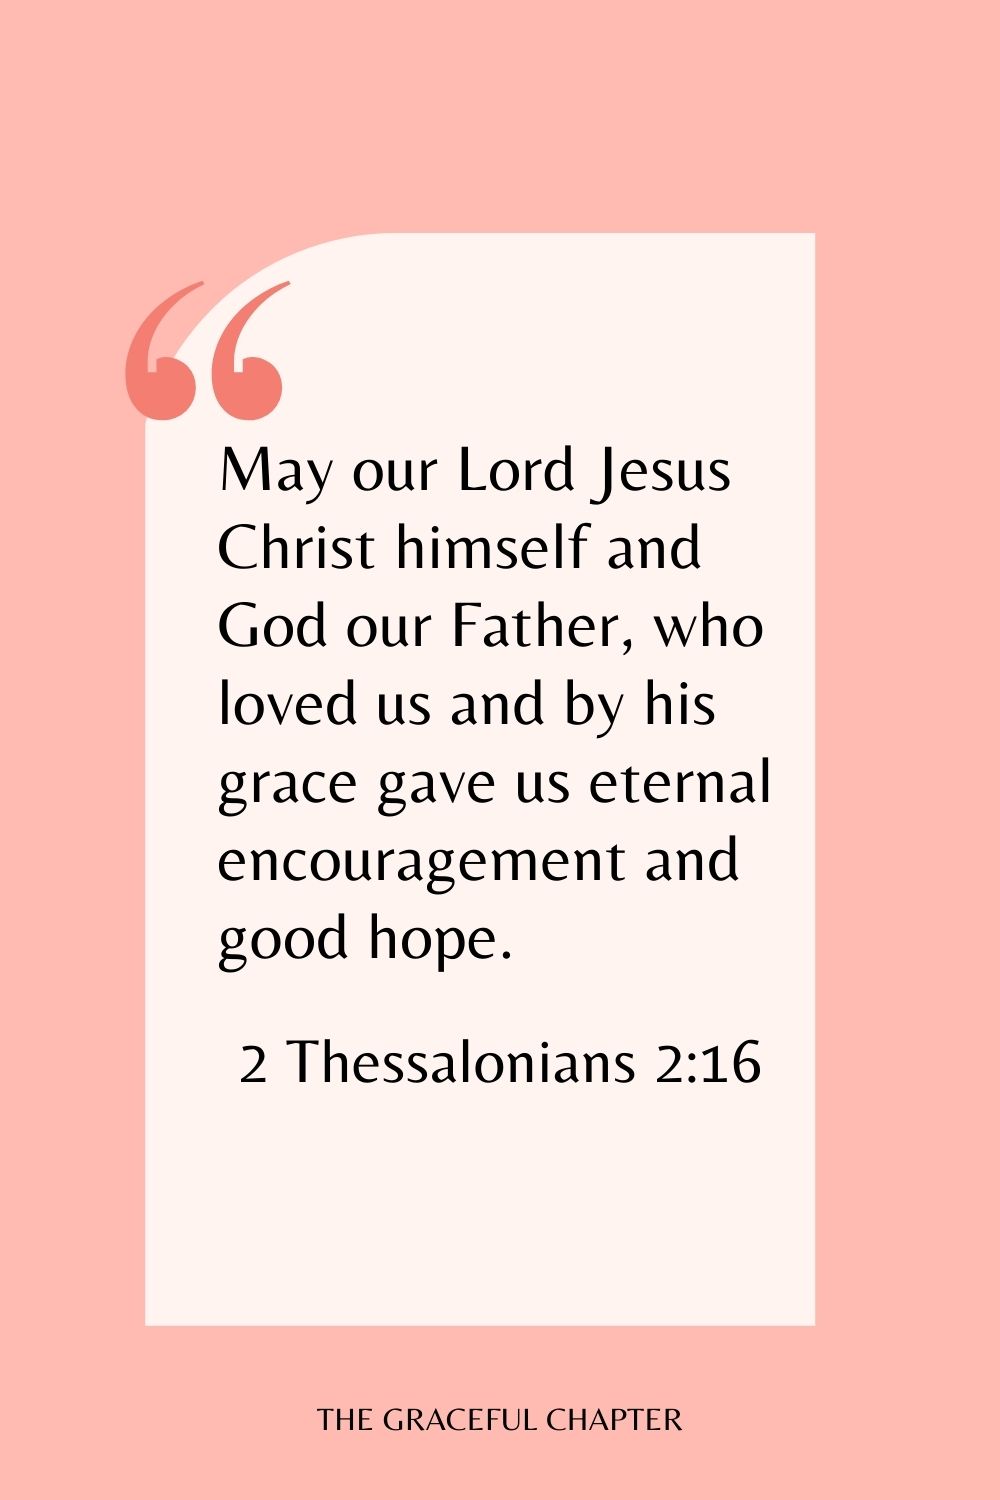 May our Lord Jesus Christ himself and God our Father, who loved us and by his grace gave us eternal encouragement and good hope. 2 Thessalonians 2:16